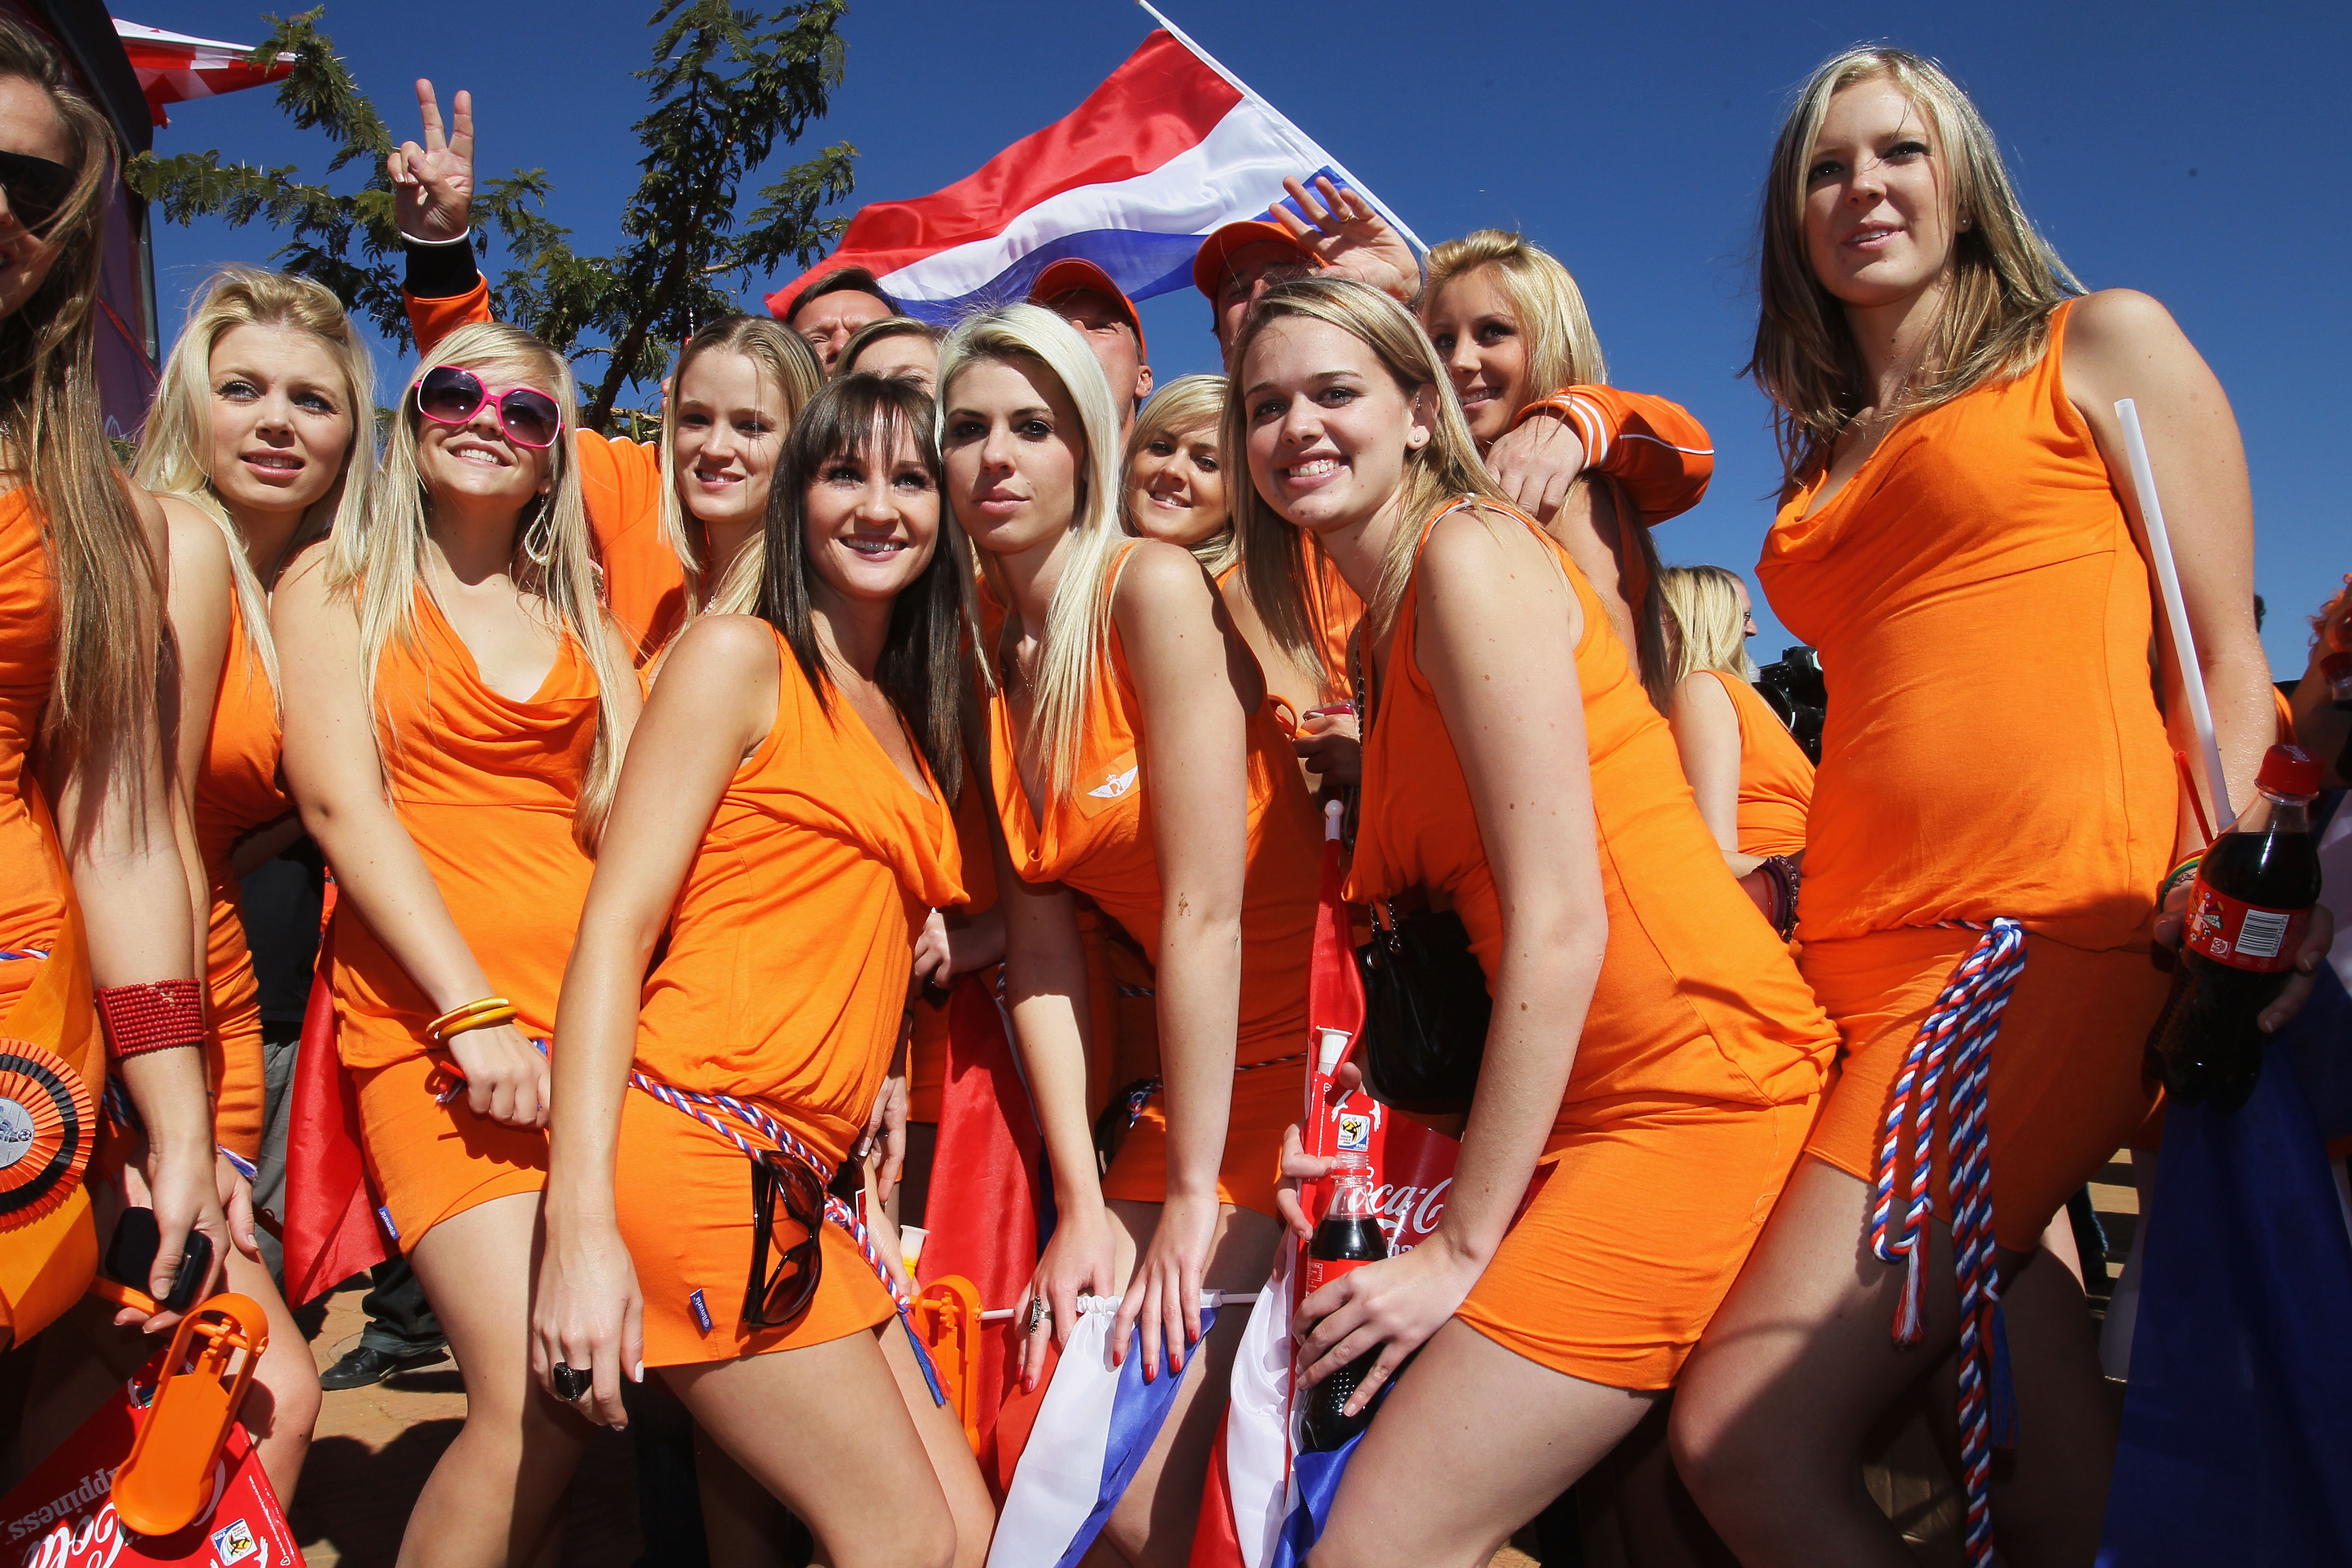 Fifa 2010 World Cup Dutch Girls In Mini Skirts Cause A Scandal 